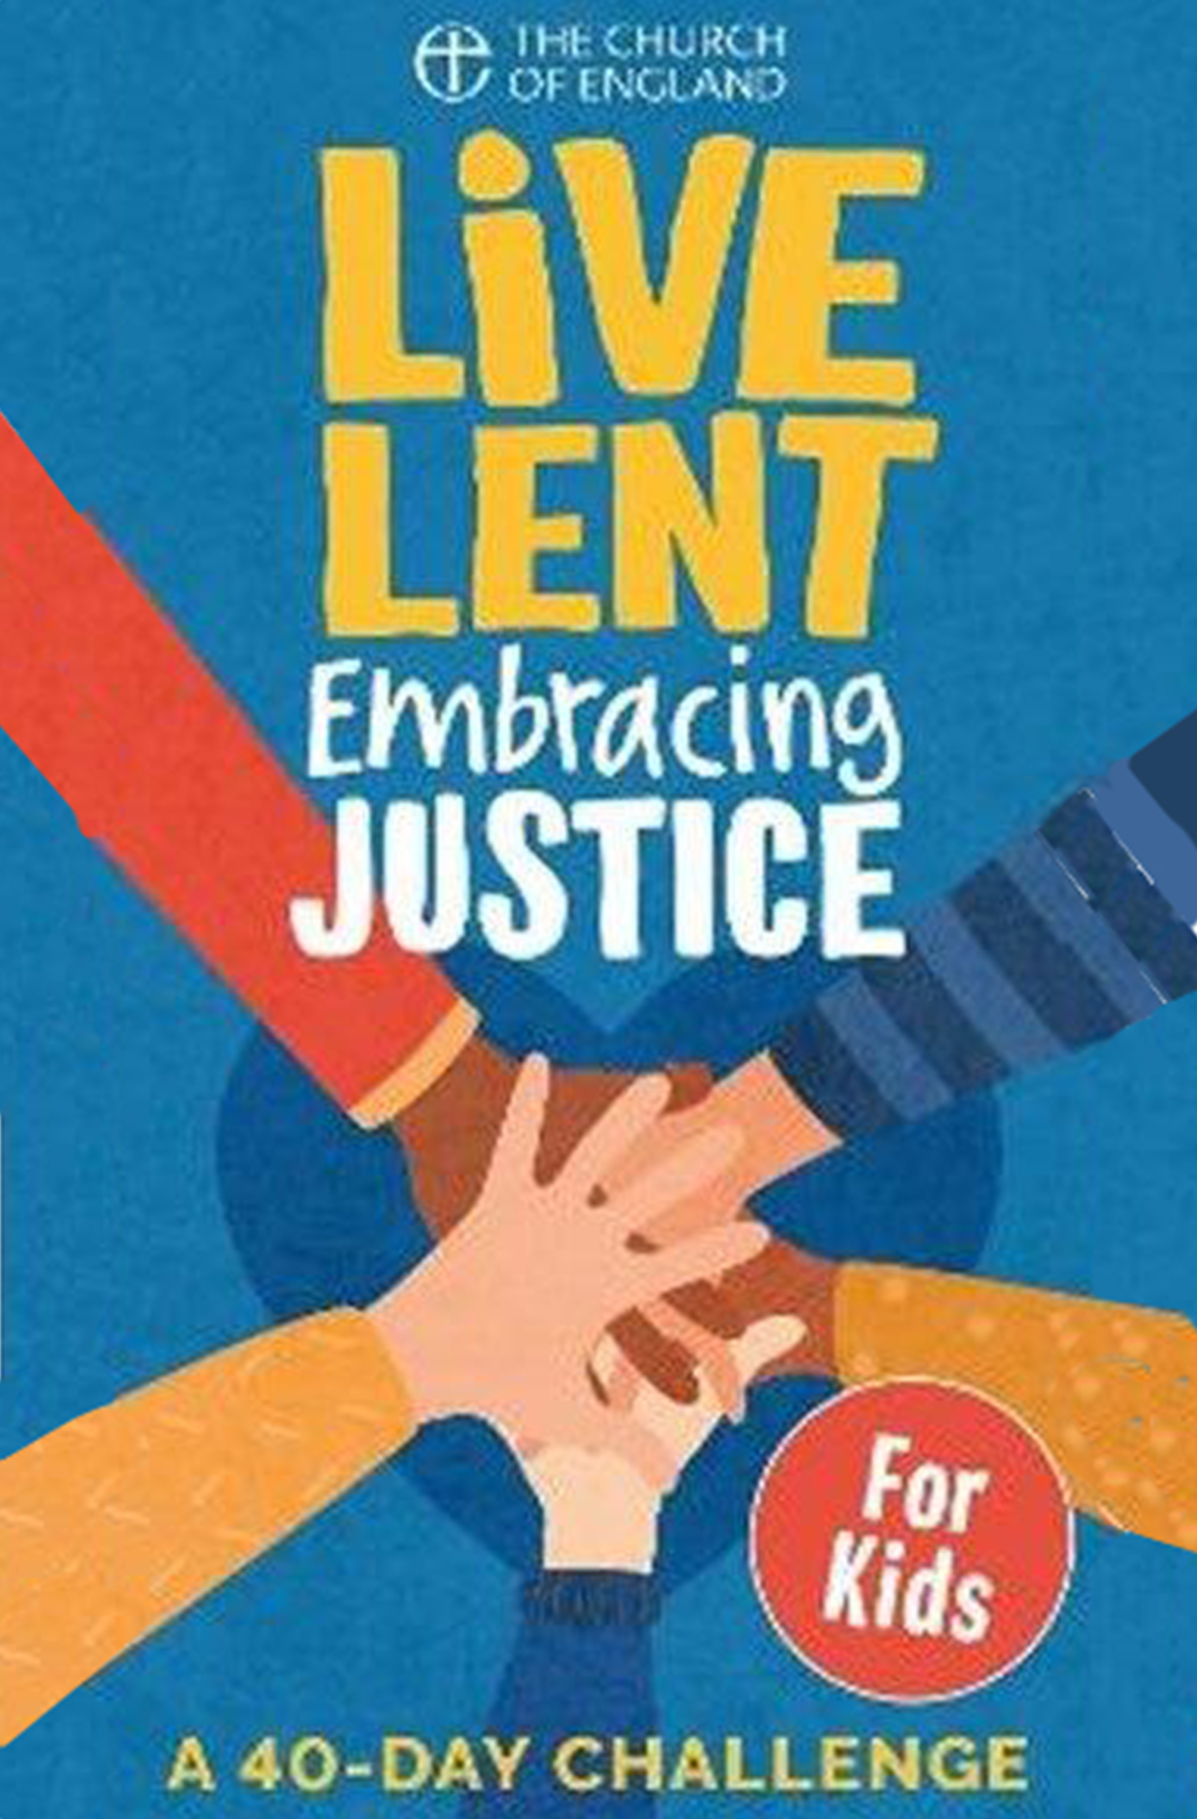 Live Lent. Embracing Justice: a 40-day challenge (For Kids)